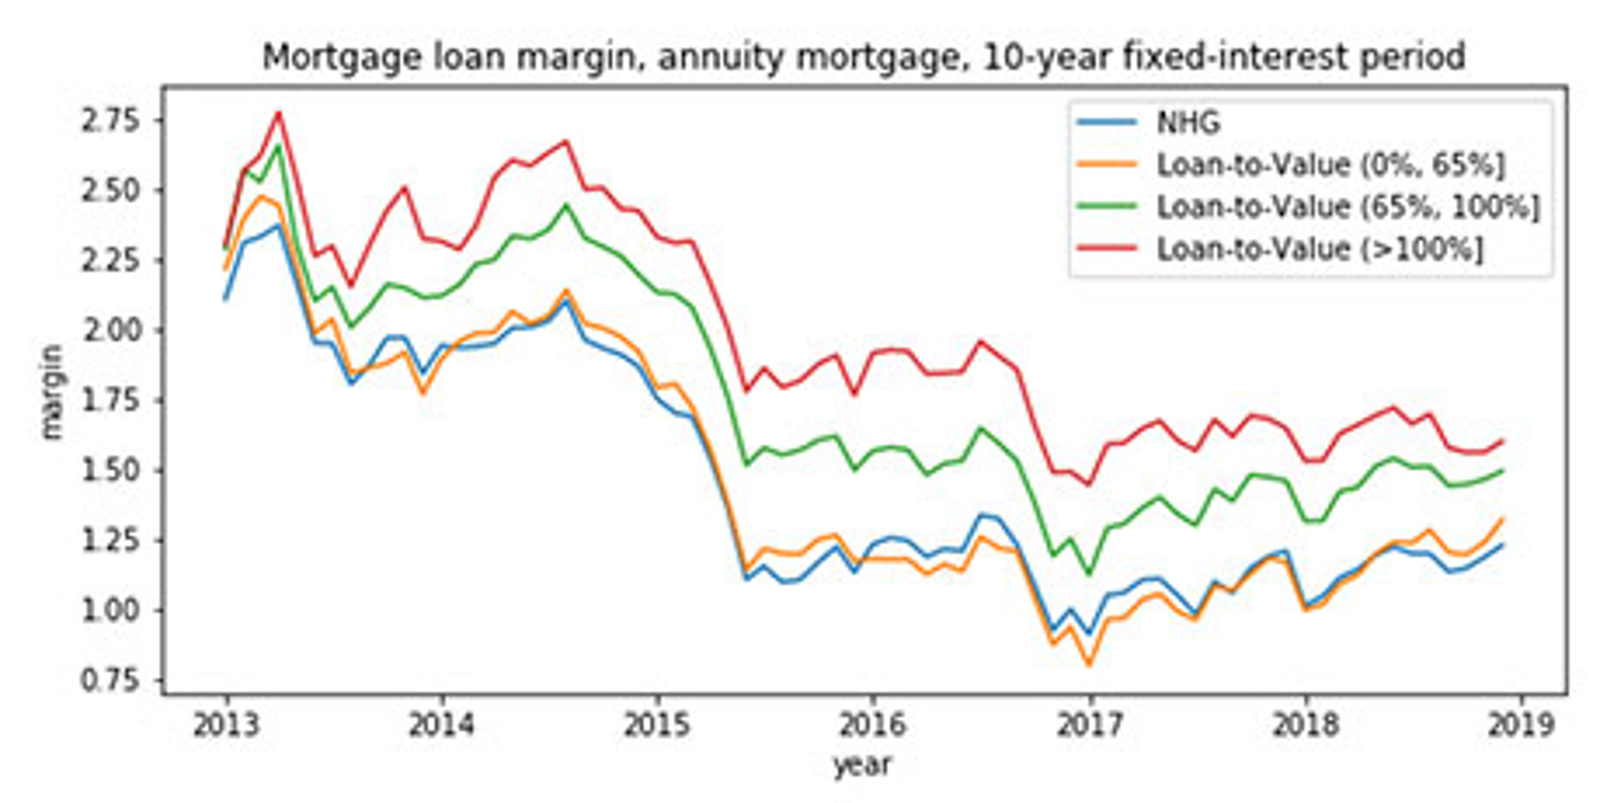 Mortgage loan margin by loan-to-value